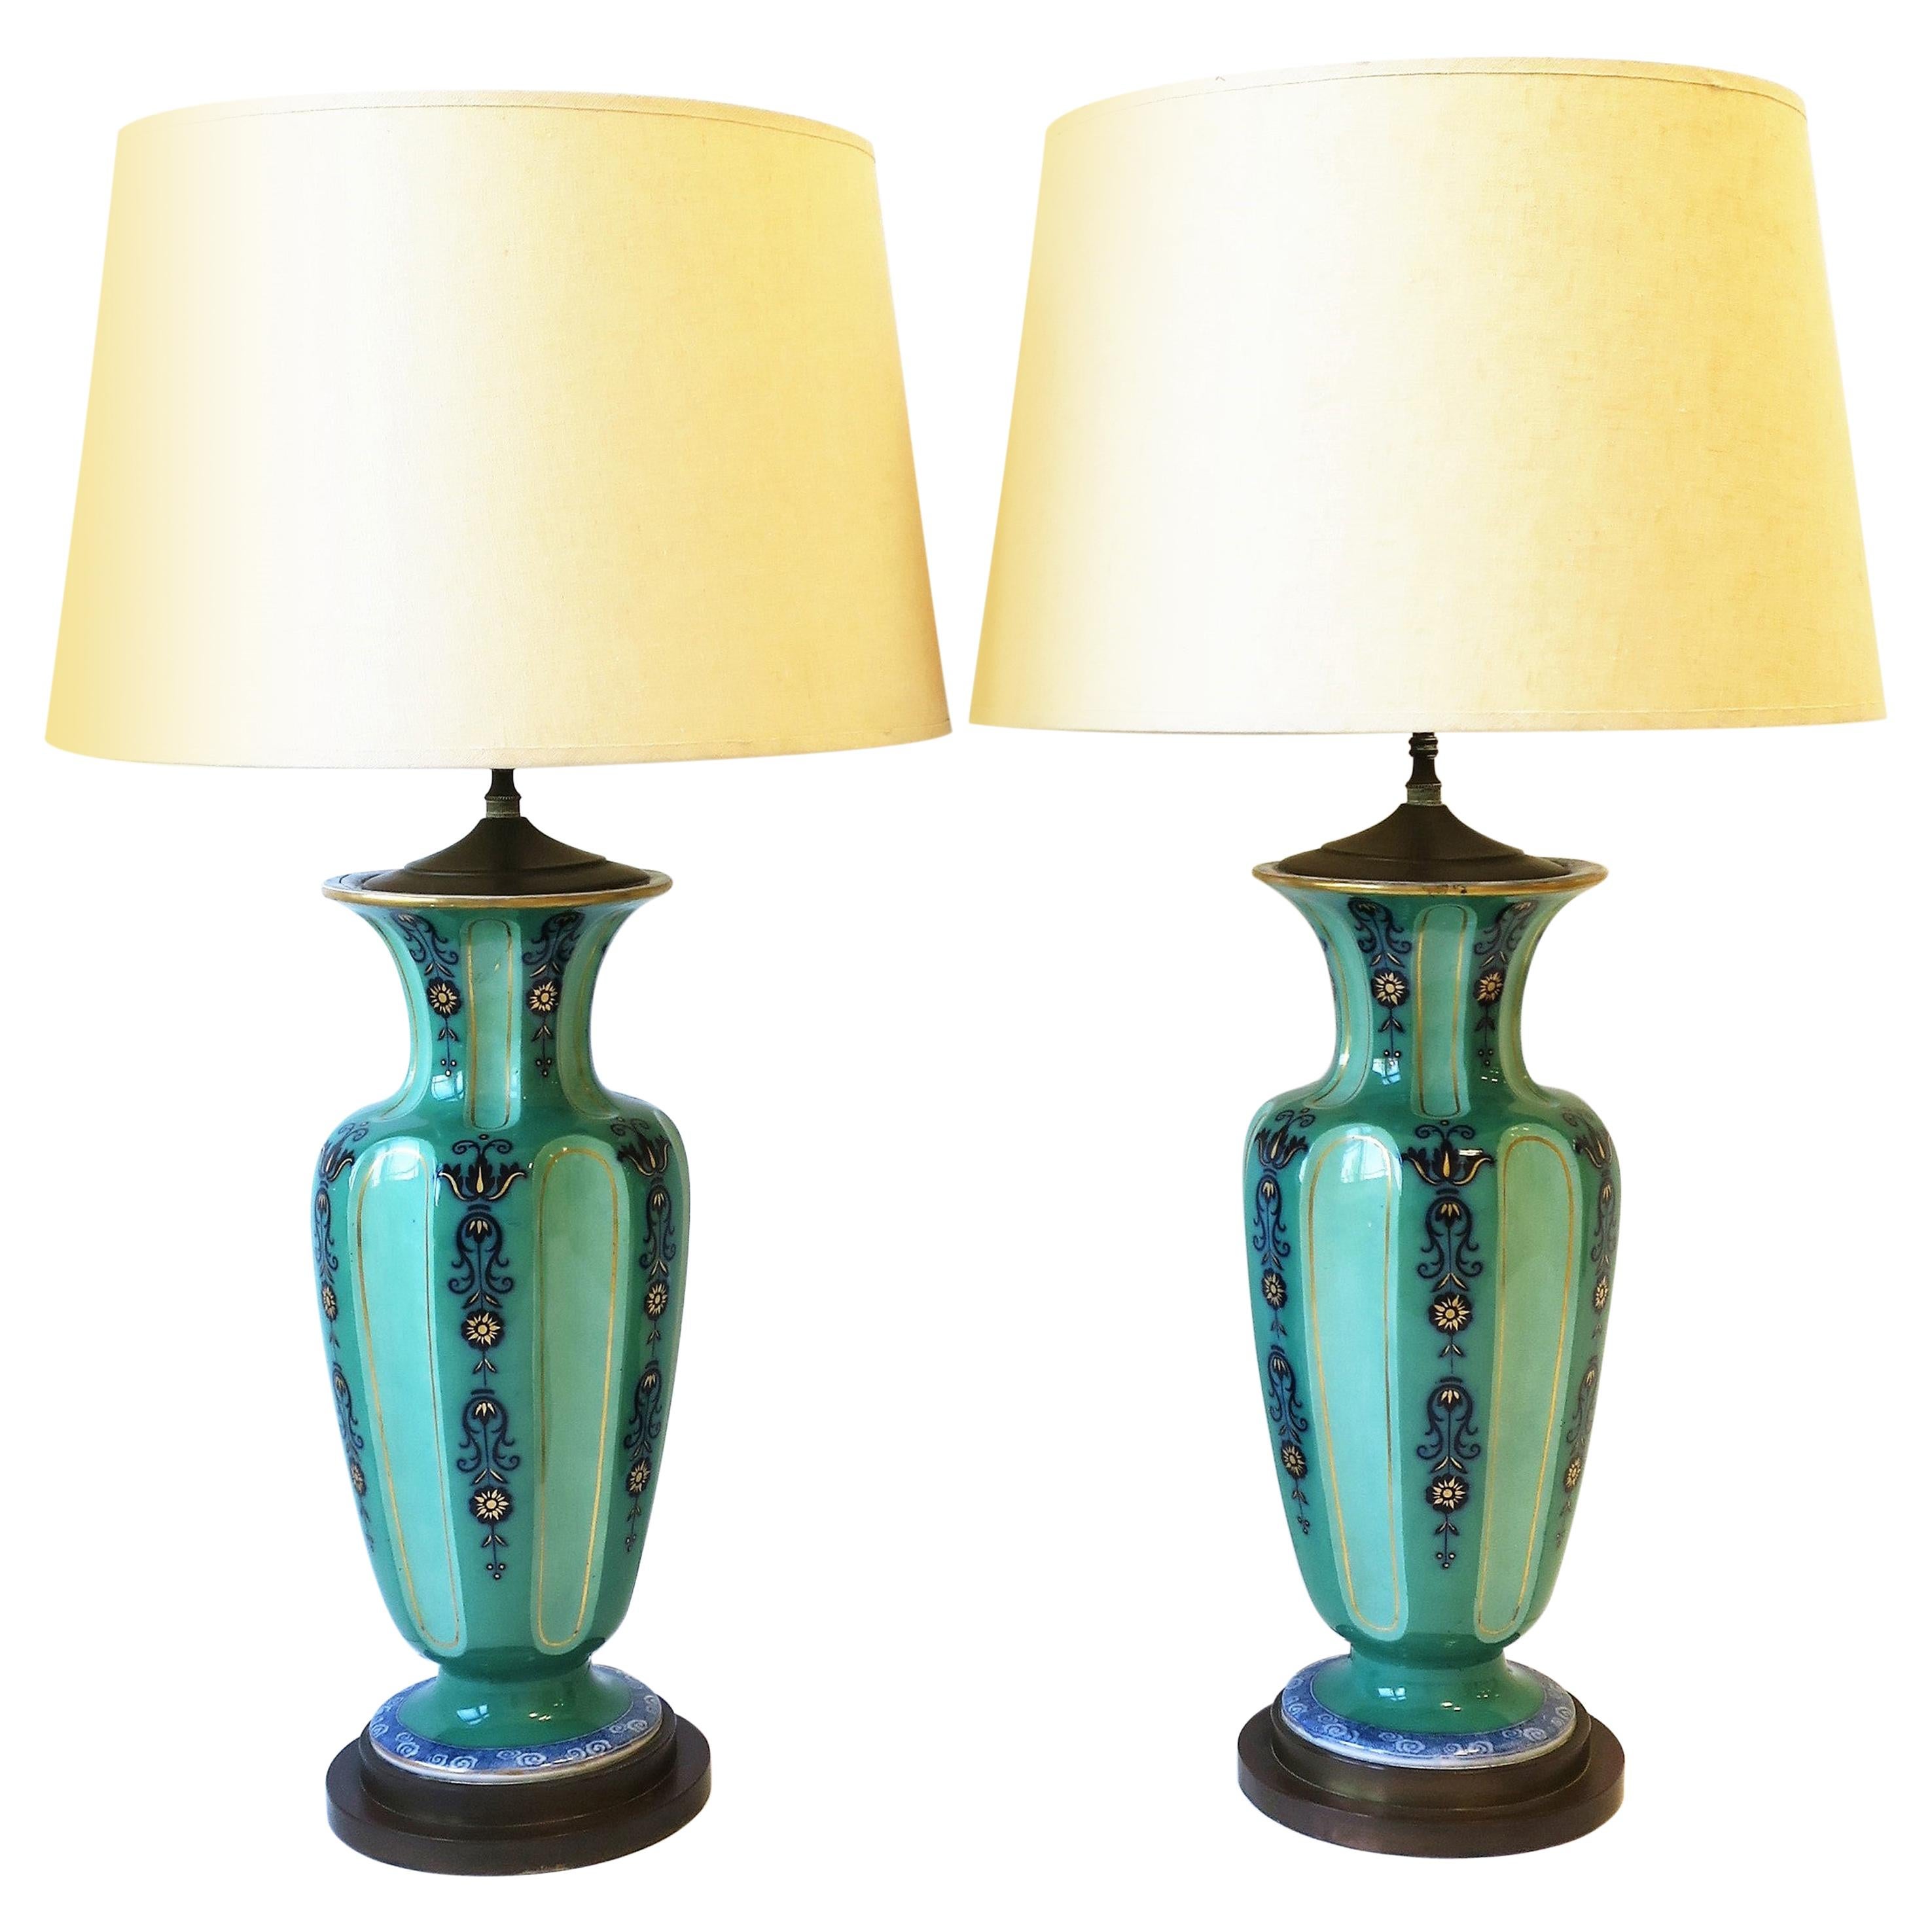 Dutch Blue White Green Porcelain Table Lamps Ginger Jar Style, circa 1930s For Sale